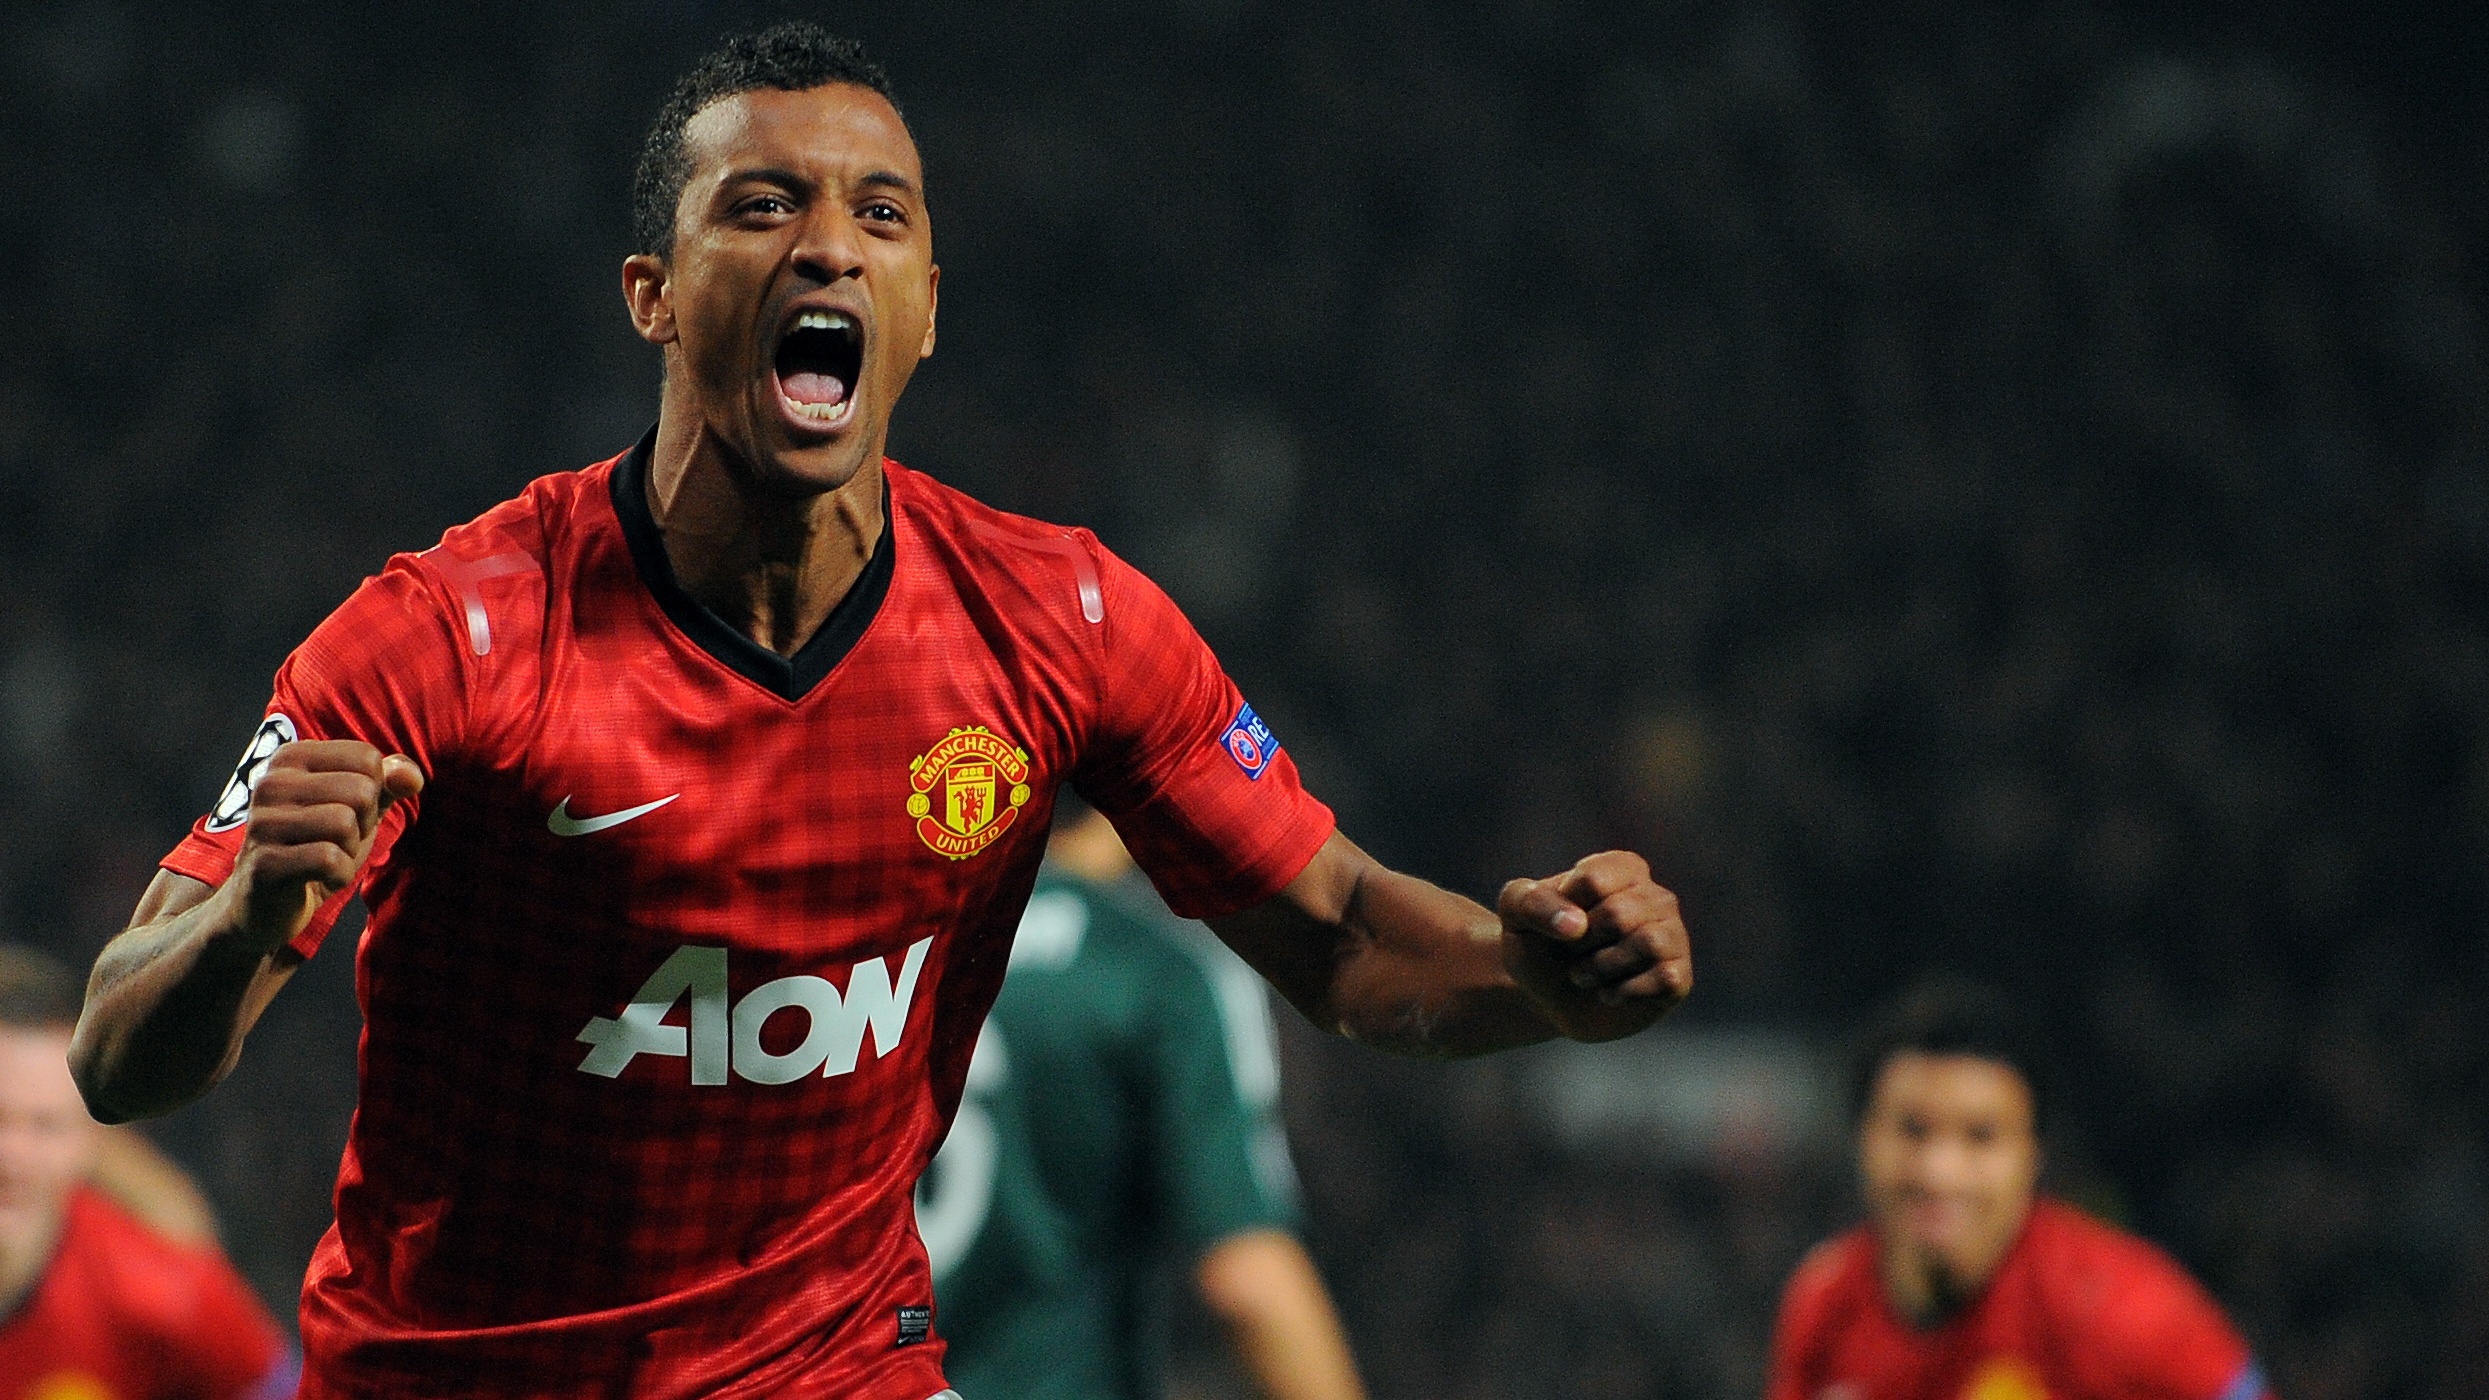 <div>Ex-Manchester United player Nani joins A-League's Victory</div>